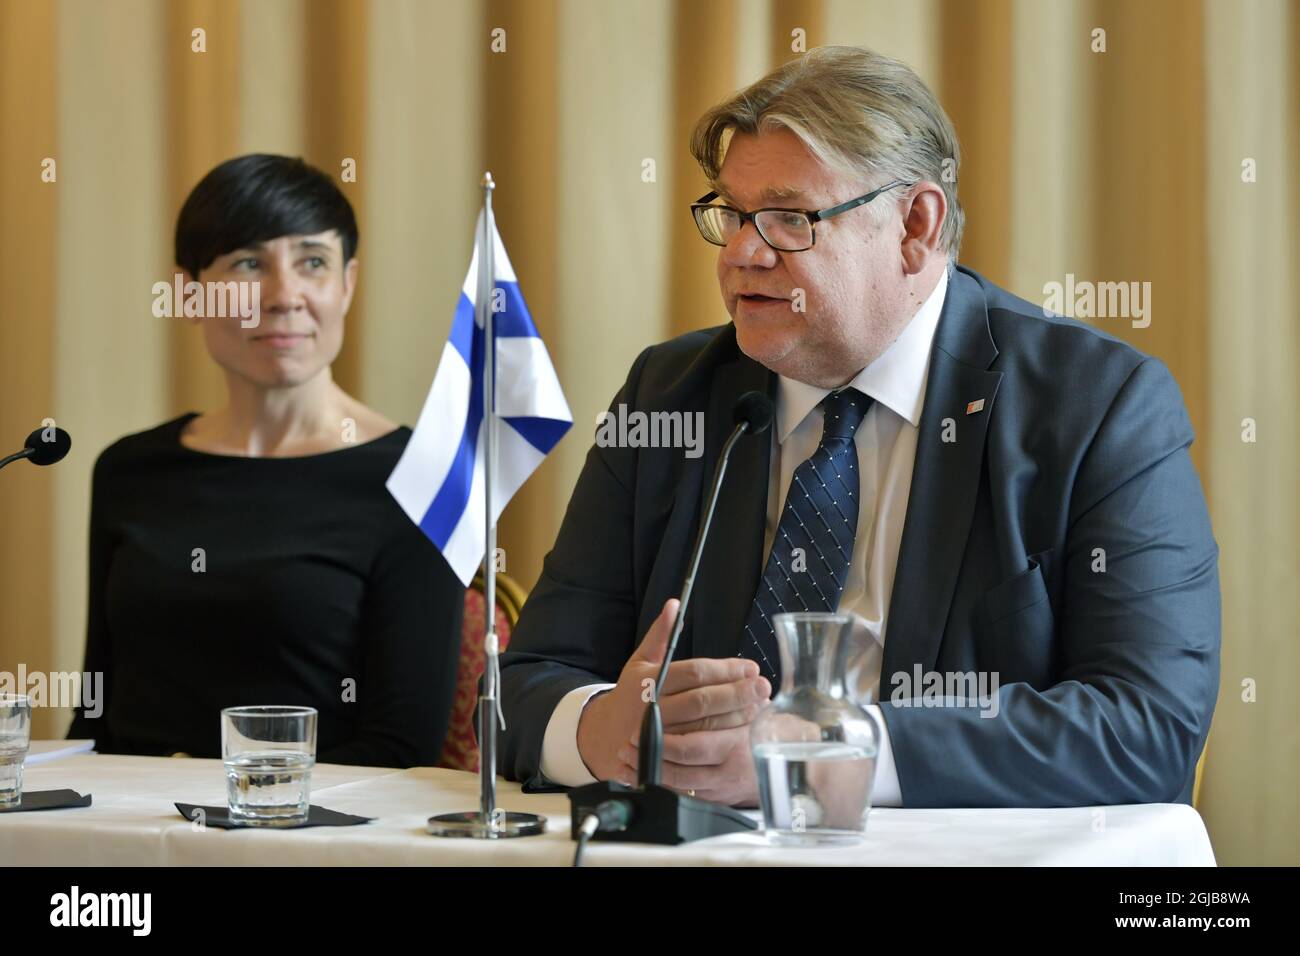 Timo Soini , Foreign Ministers of Finland and to the left Ine Eriksen Soreide, Foreign Minister of Norway during a joint press conference which concludes the Nordic Foreign Minister meeting at Nasby Castle in Taby, Sweden April 18. 2018. Photo: Jessica Gow / TT / Kod 10070  Stock Photo